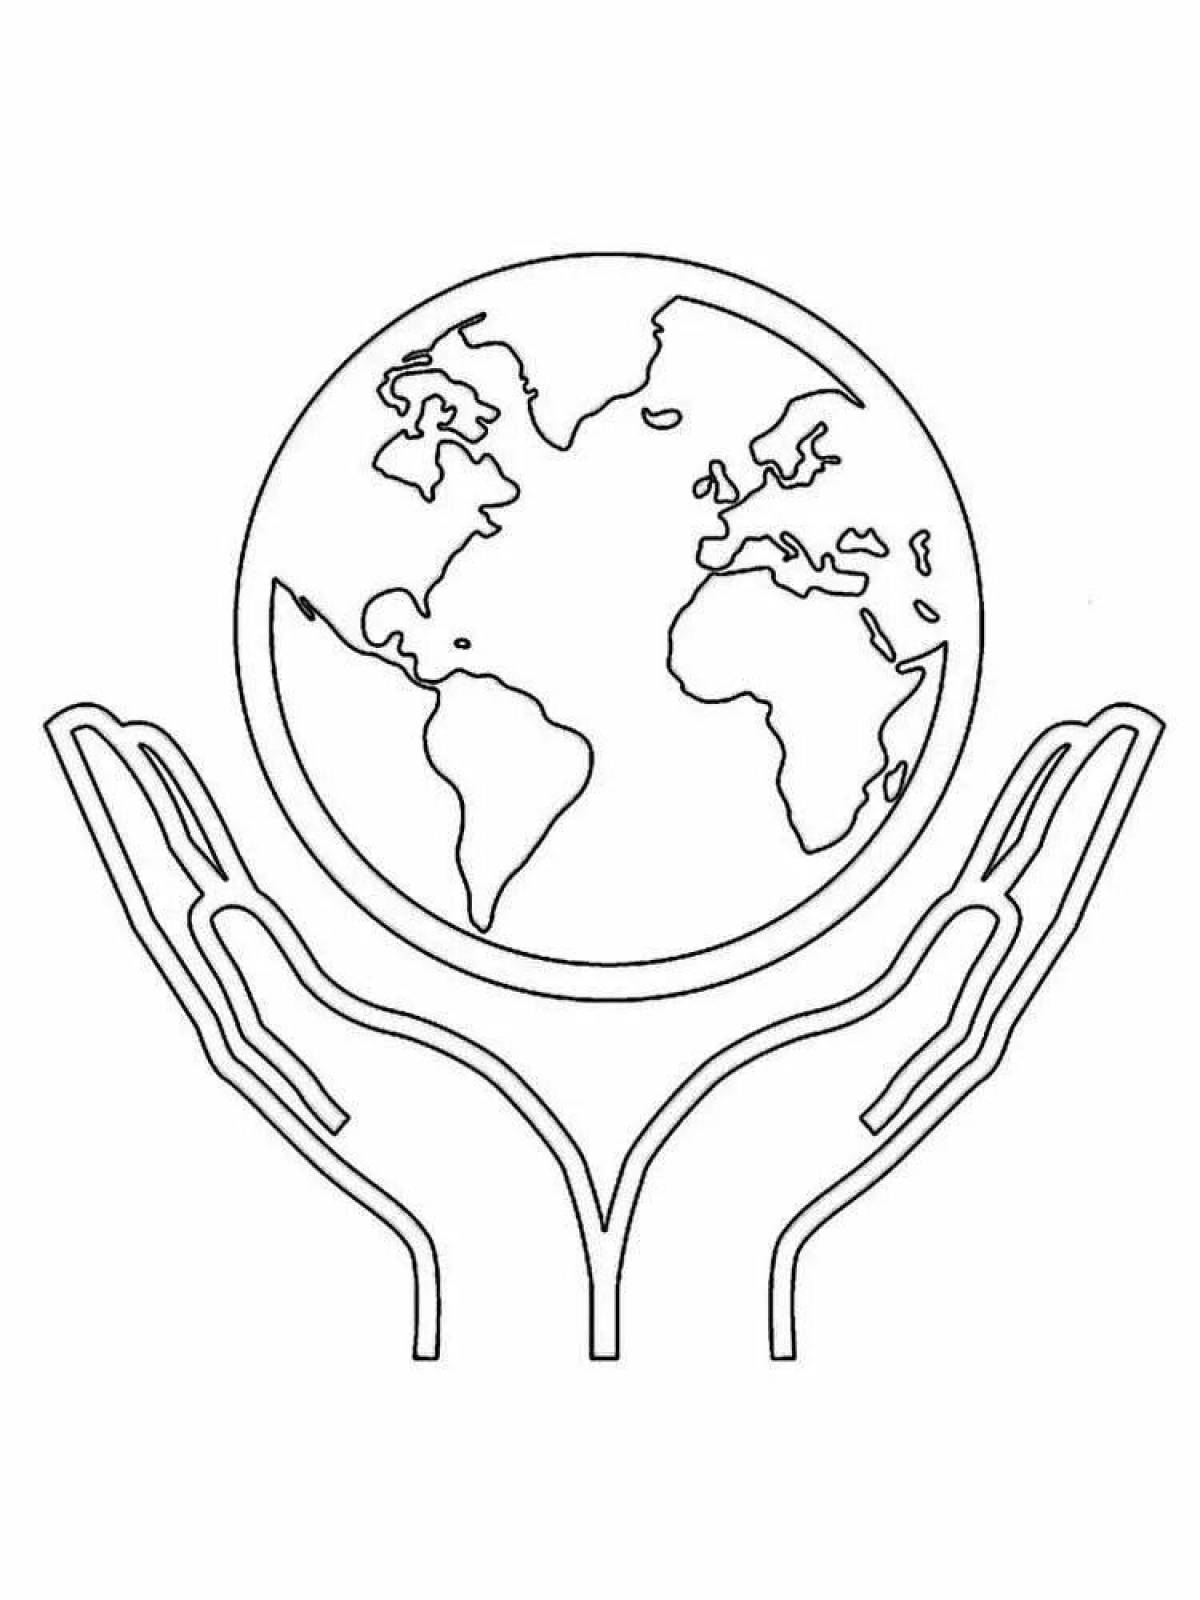 Animated globe coloring book